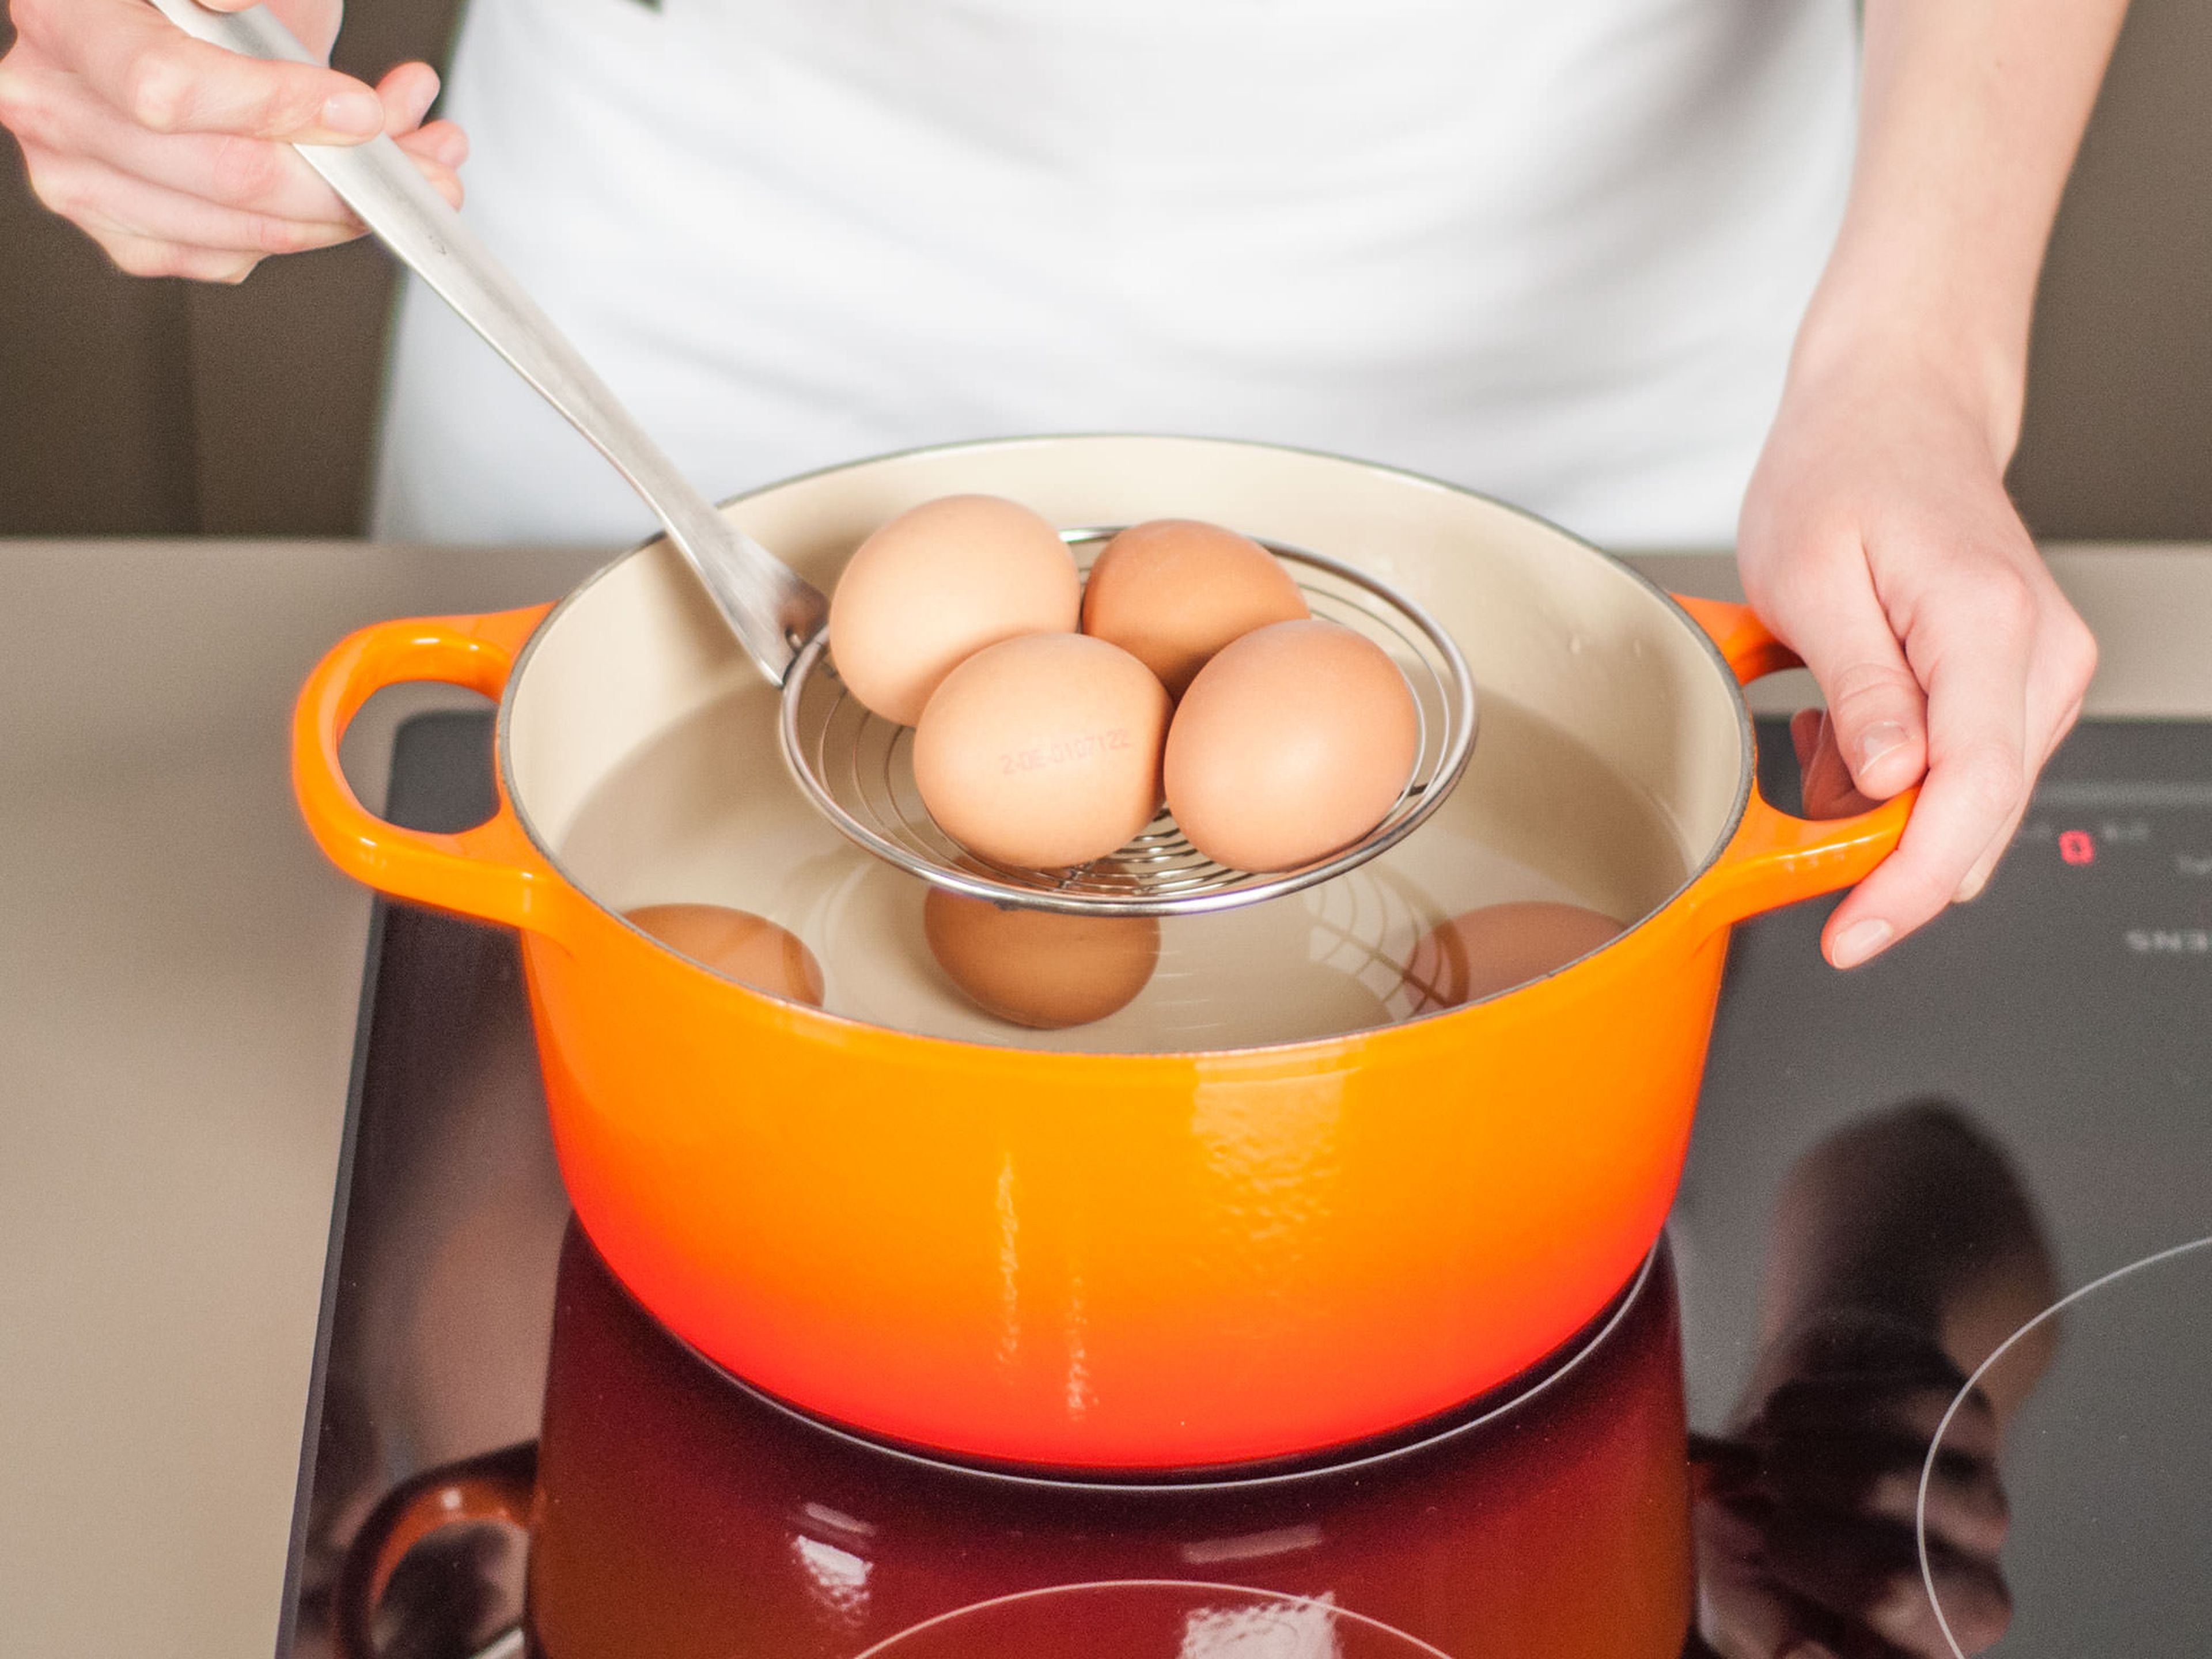 Add two thirds of the eggs to a saucepan and cover with cold water. Bring to a boil and allow to cook for 7 – 8 min. Remove from saucepan and immediately transfer to an ice bath or rinse with cold water. Peel when cool enough to handle.